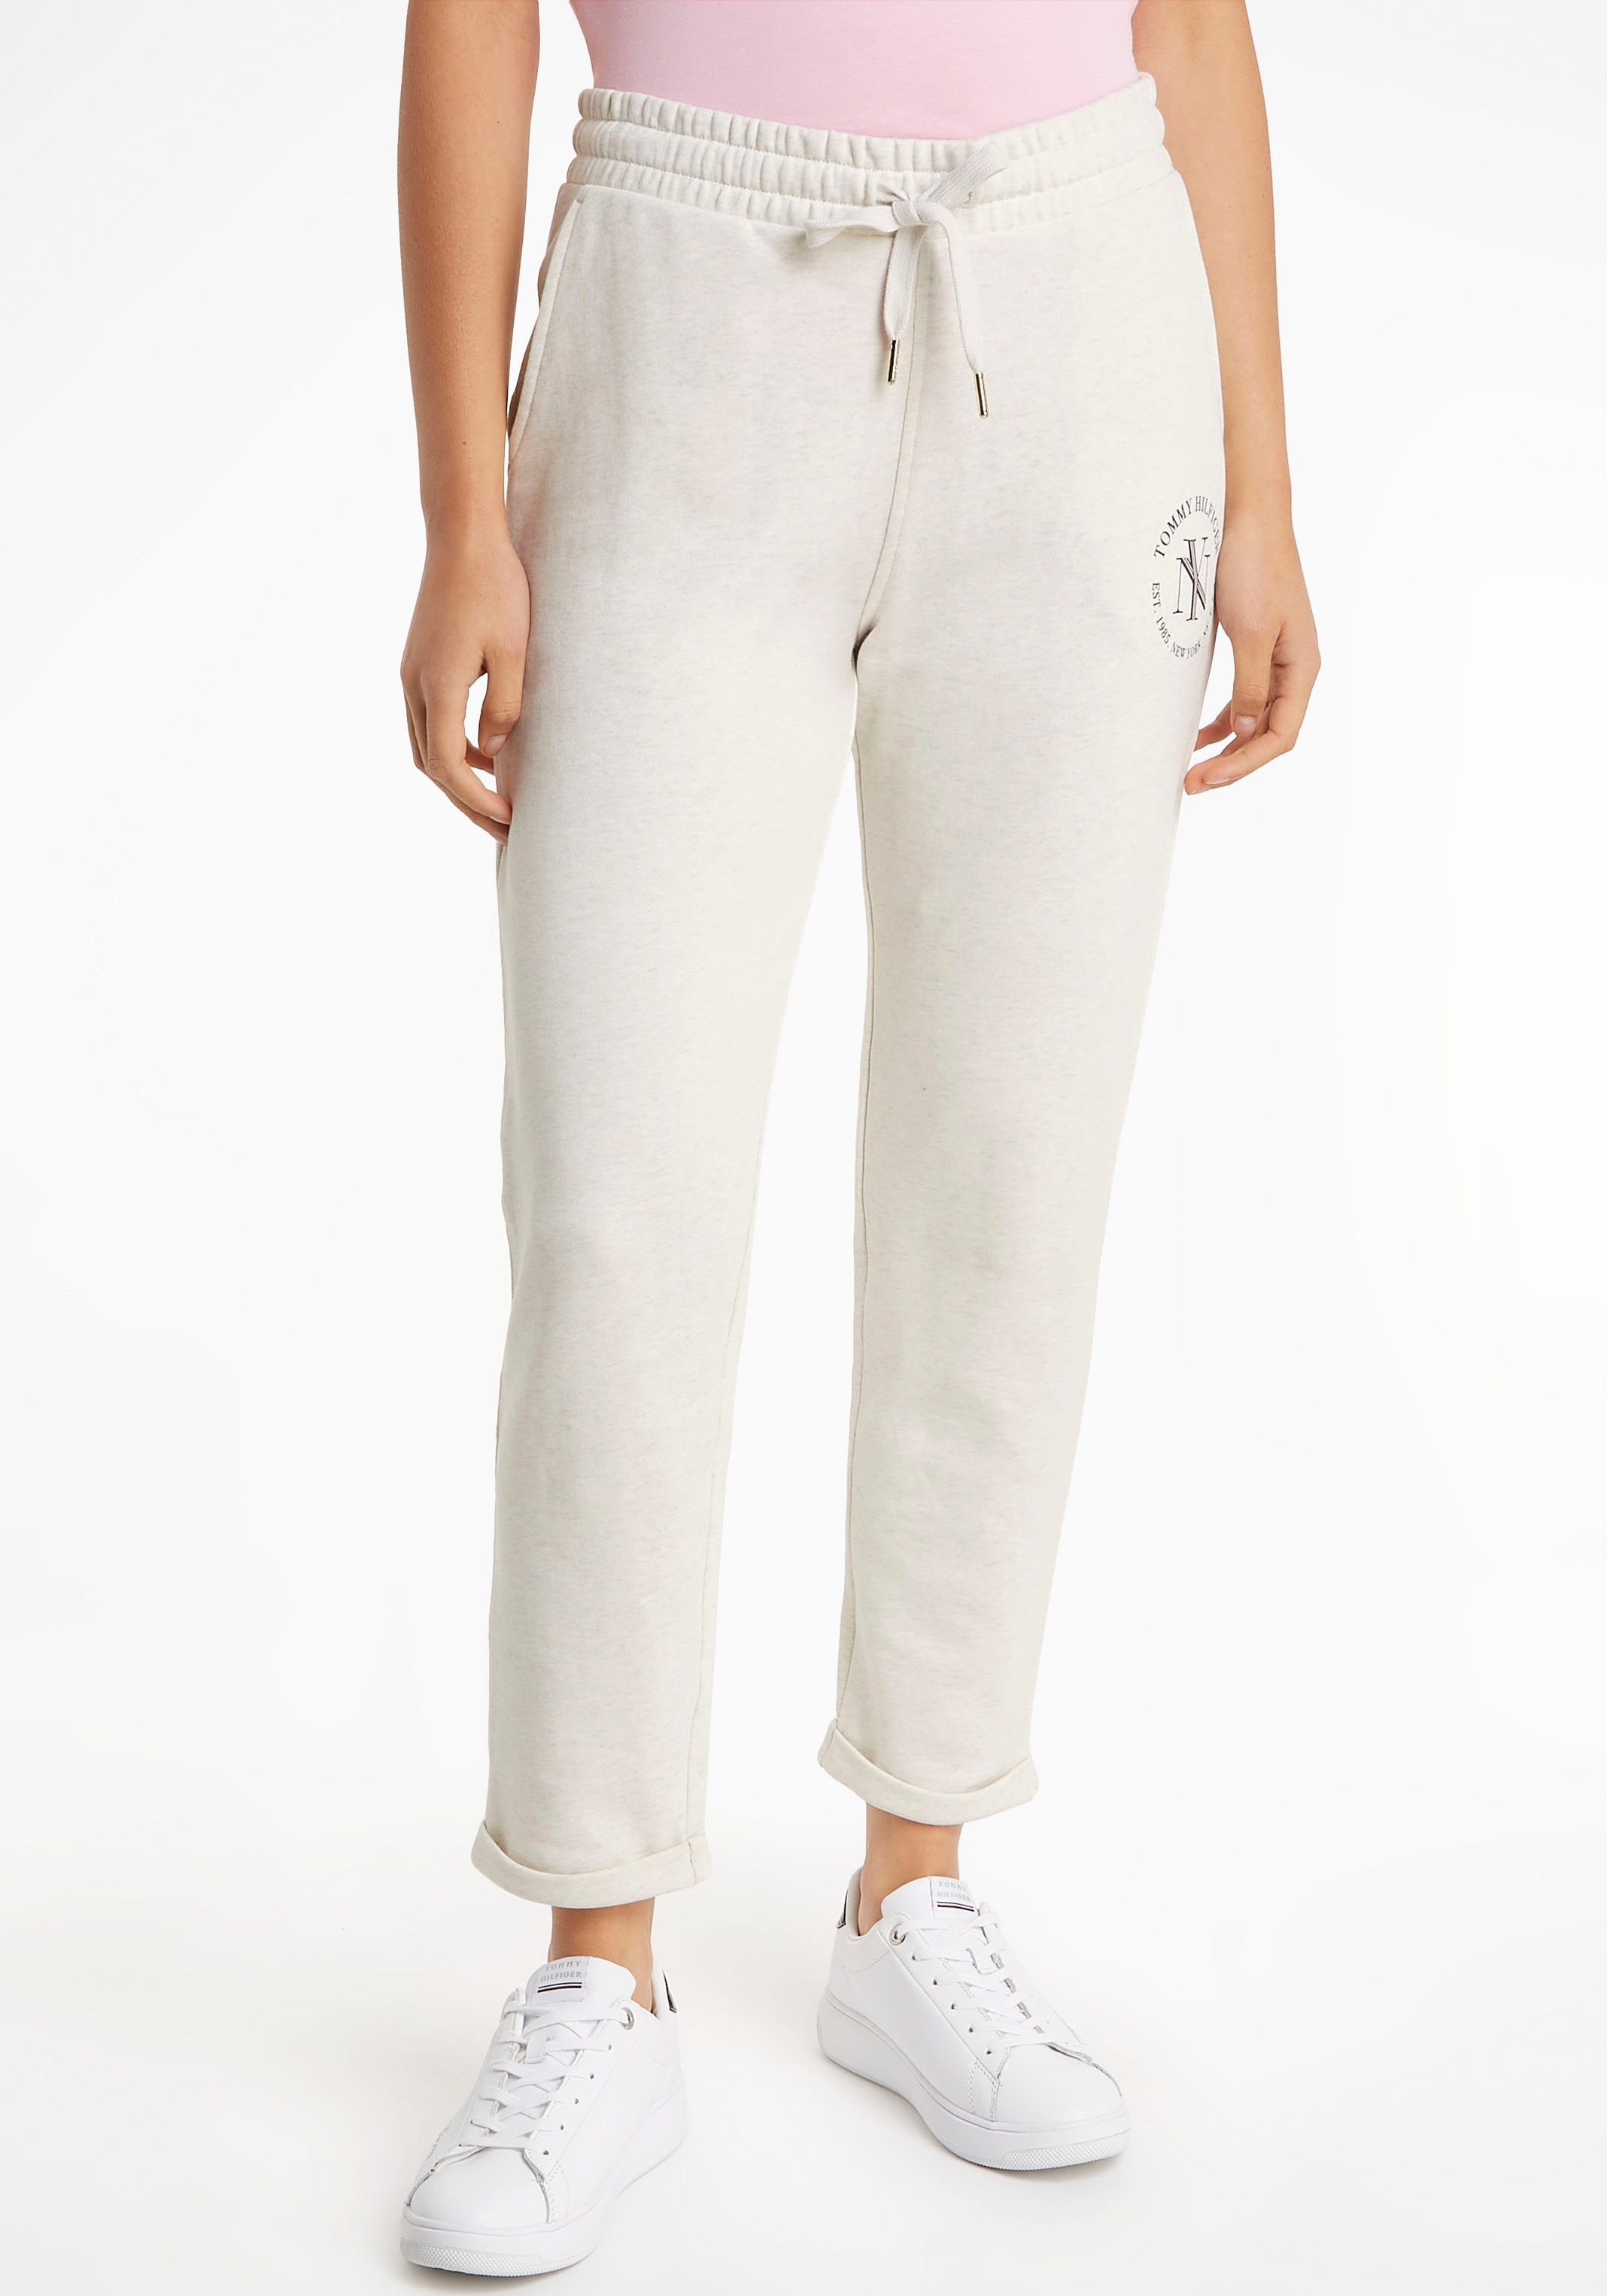 Tommy Markenlabel »TAPERED bei NYC mit Sweatpants SWEATPANTS«, ROUNDALL Tommy Hilfiger Hilfiger ♕